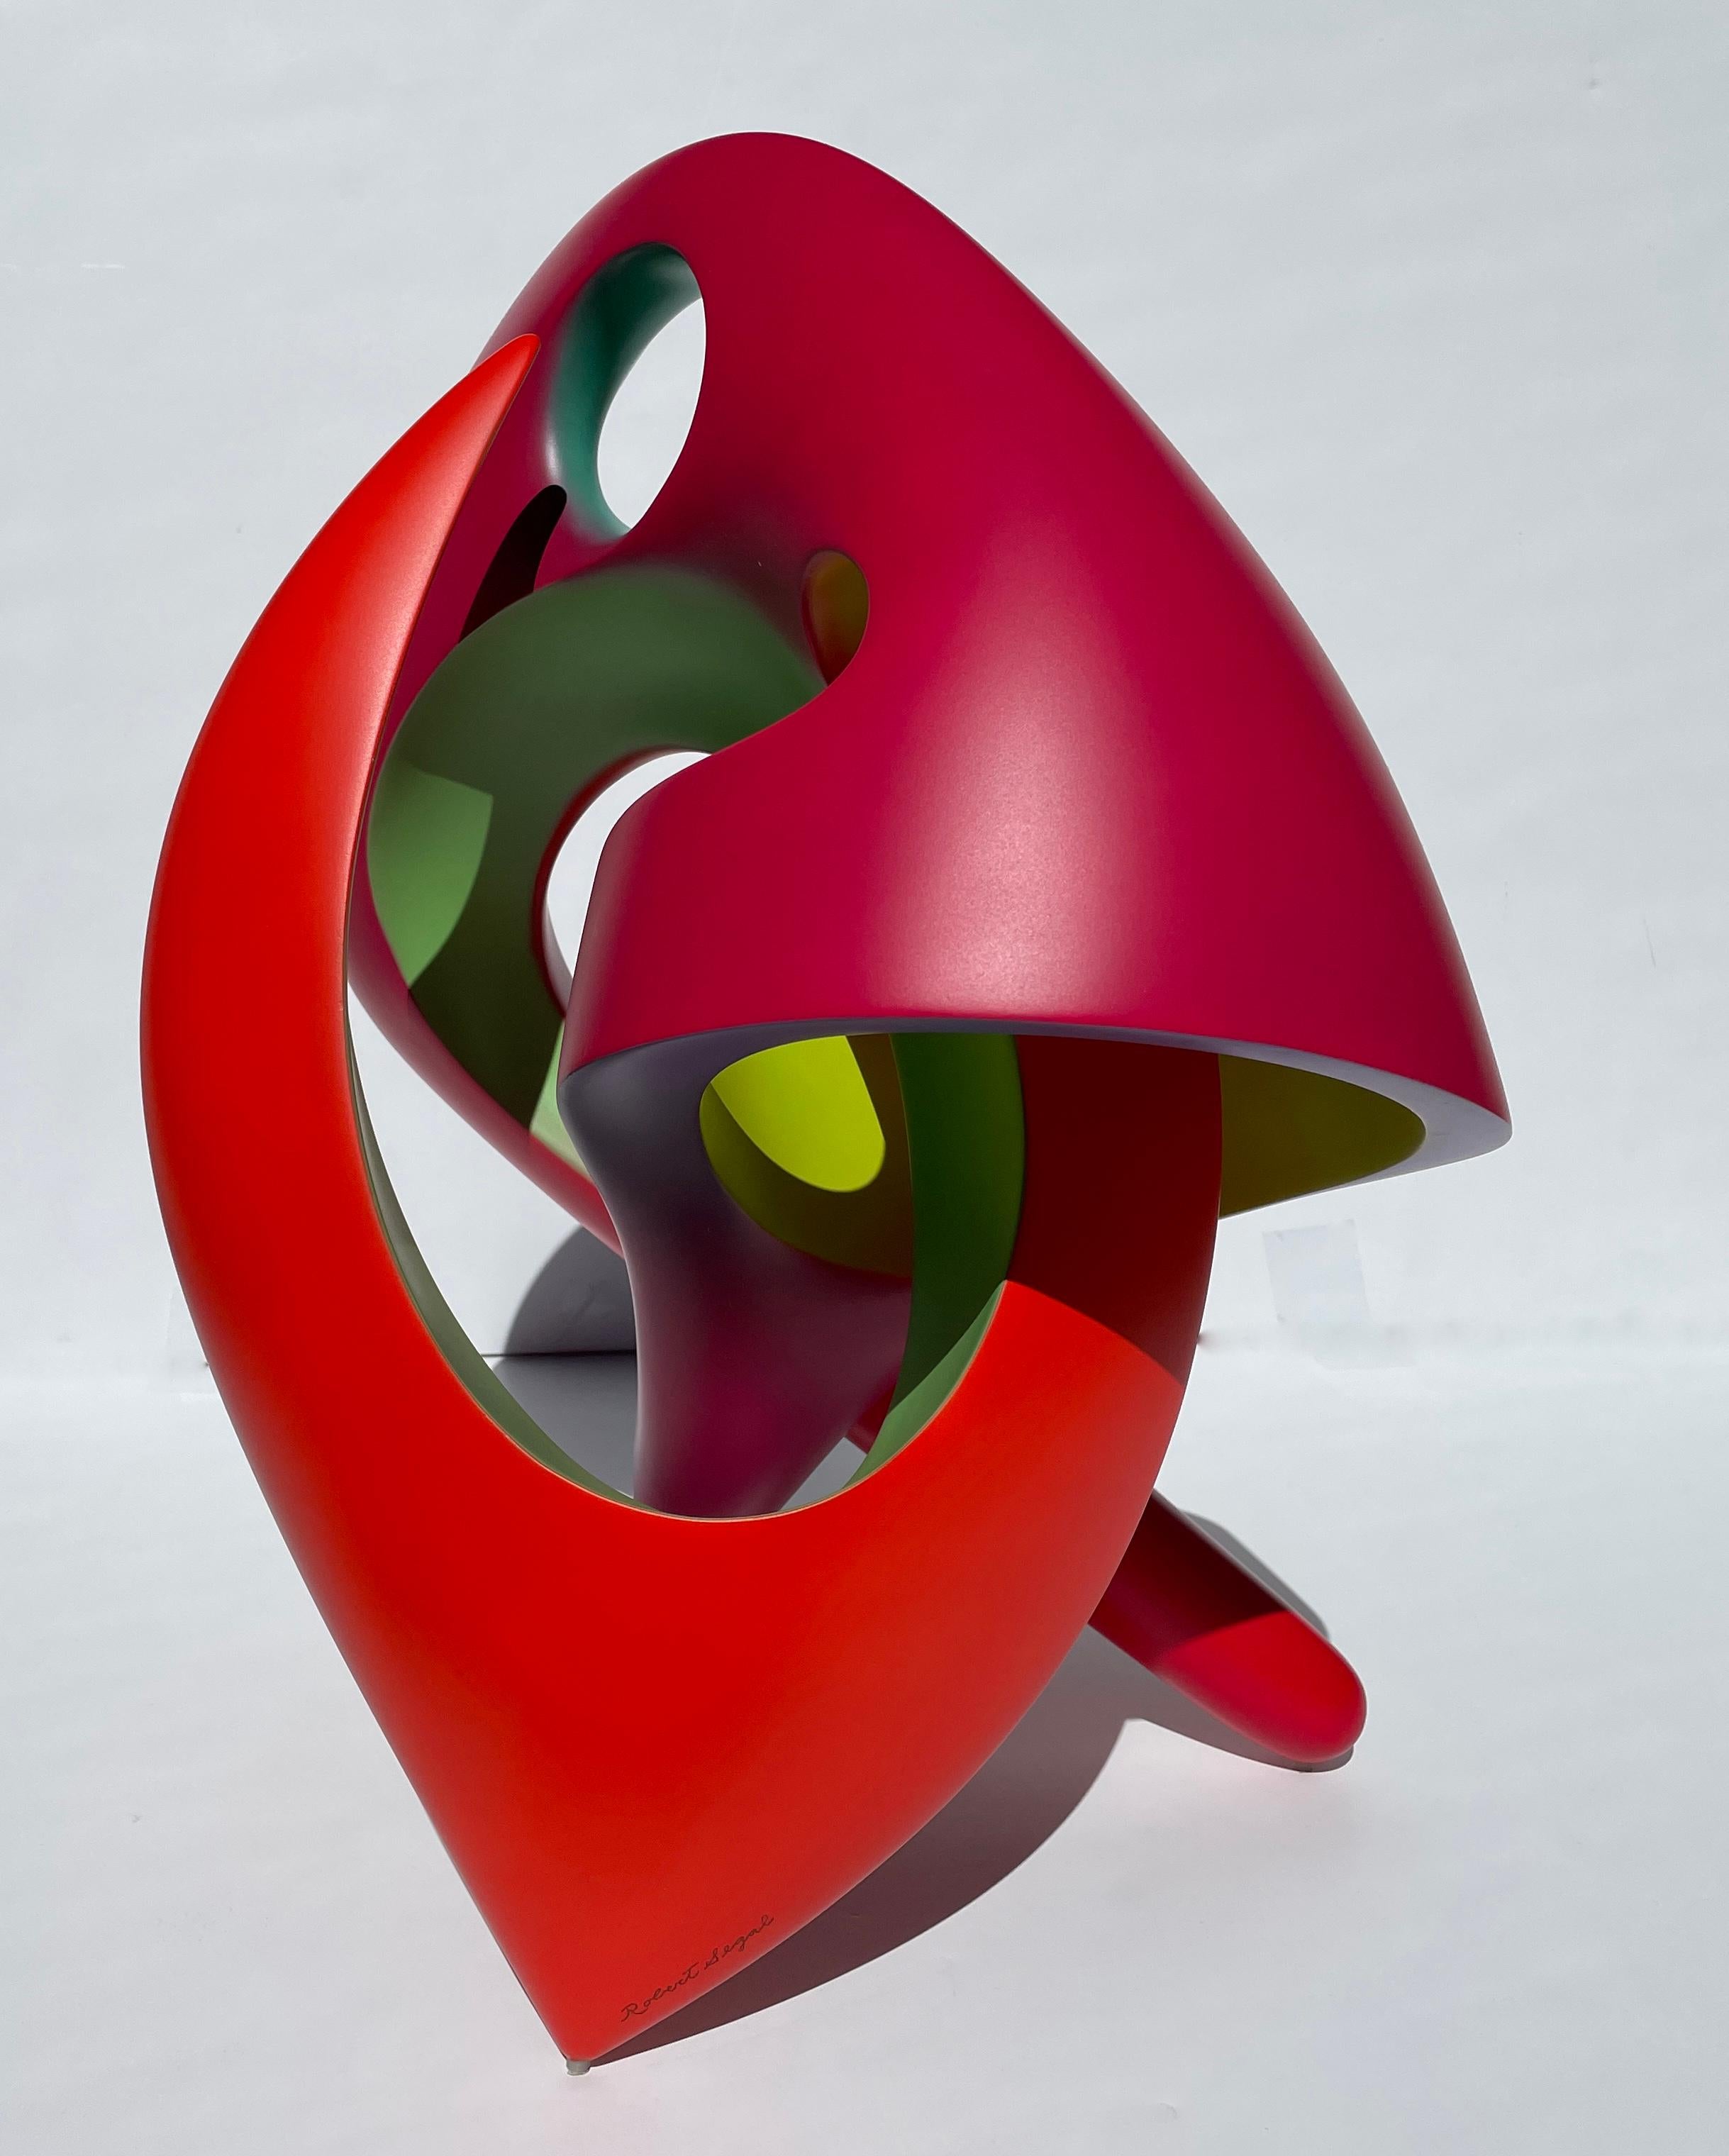 Helical Passage, Abstract Sculpture Brightly Colored Geometric Interlocking Form 1